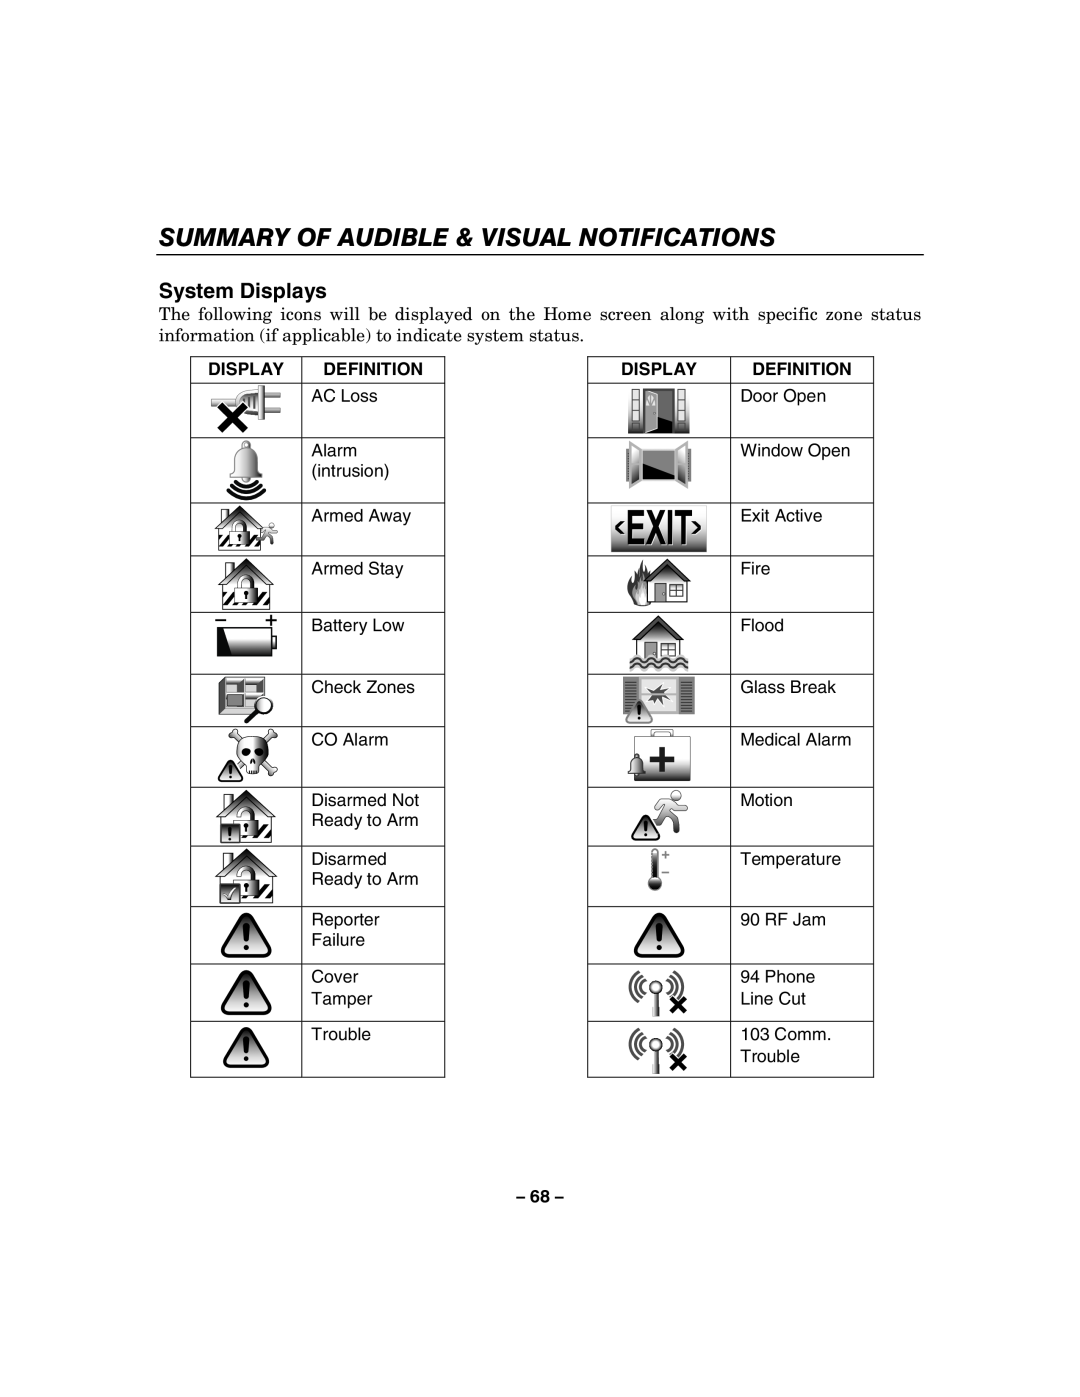 Honeywell 800-06894 manual System Displays, Summary Of Audible & Visual Notifications, Definition 